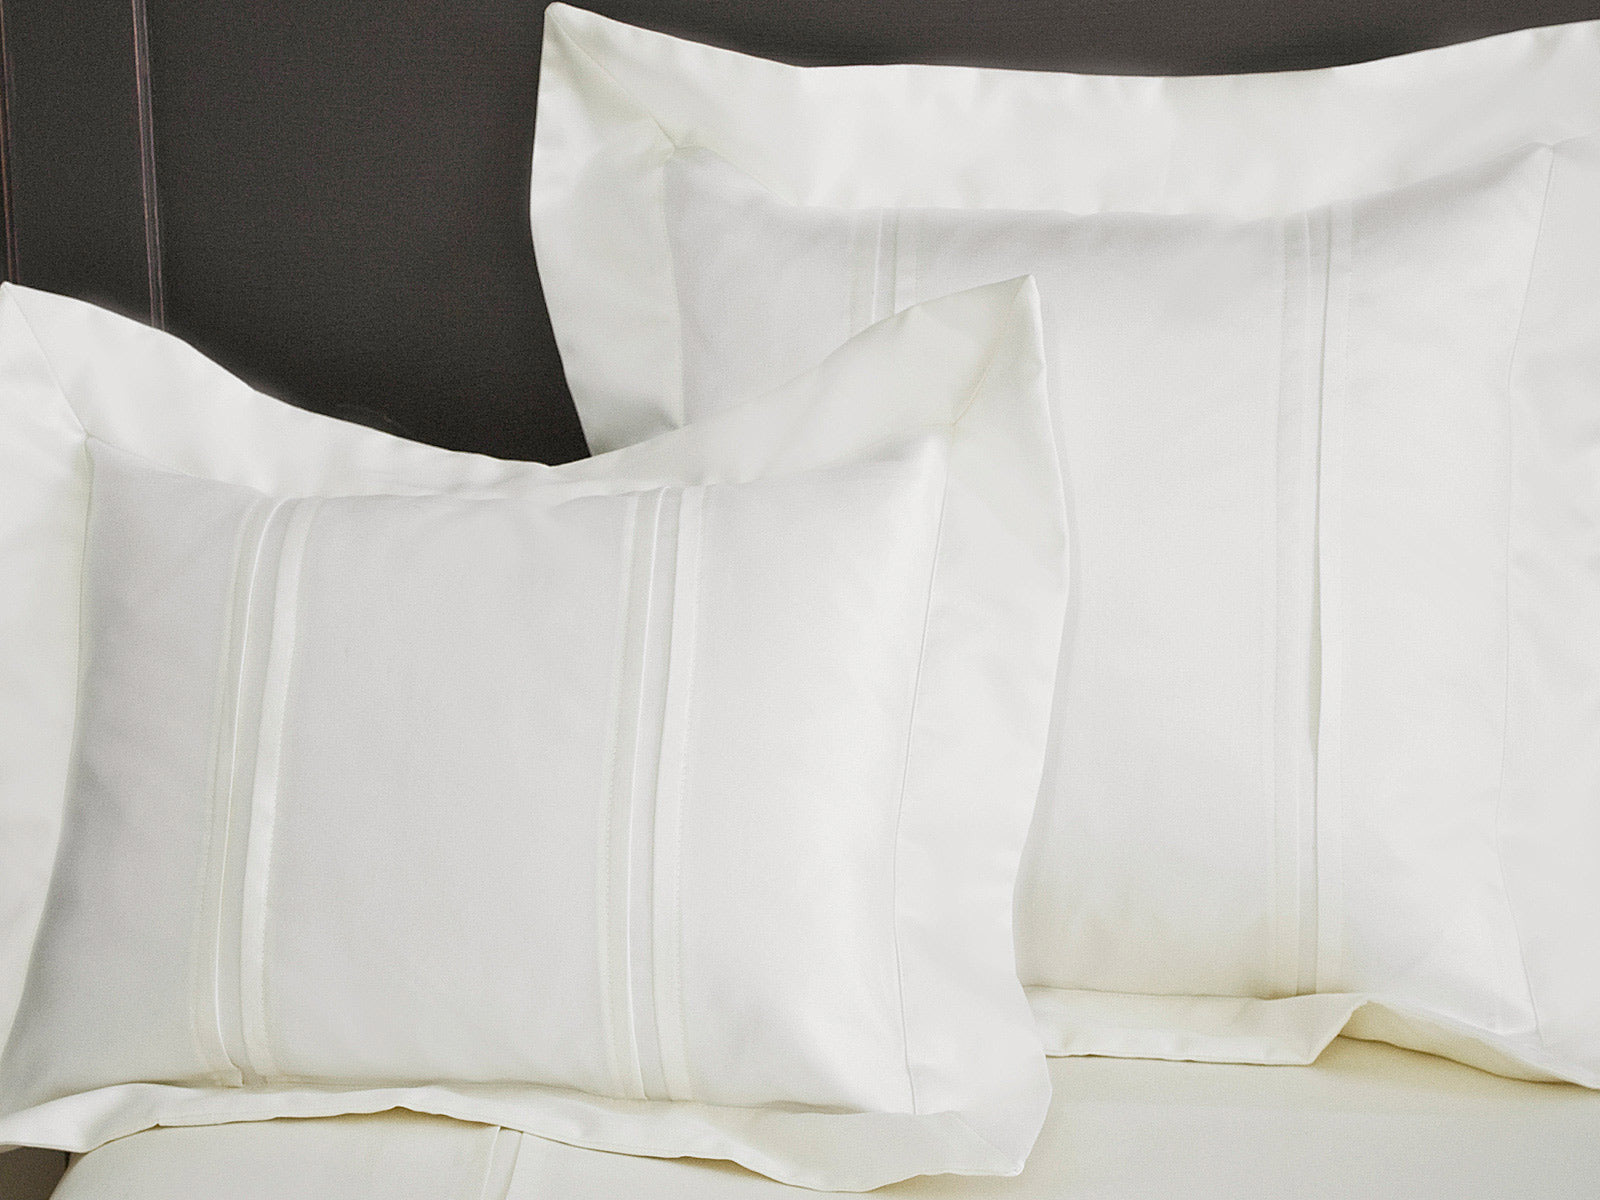 Regency - Sheet and Pillow cases